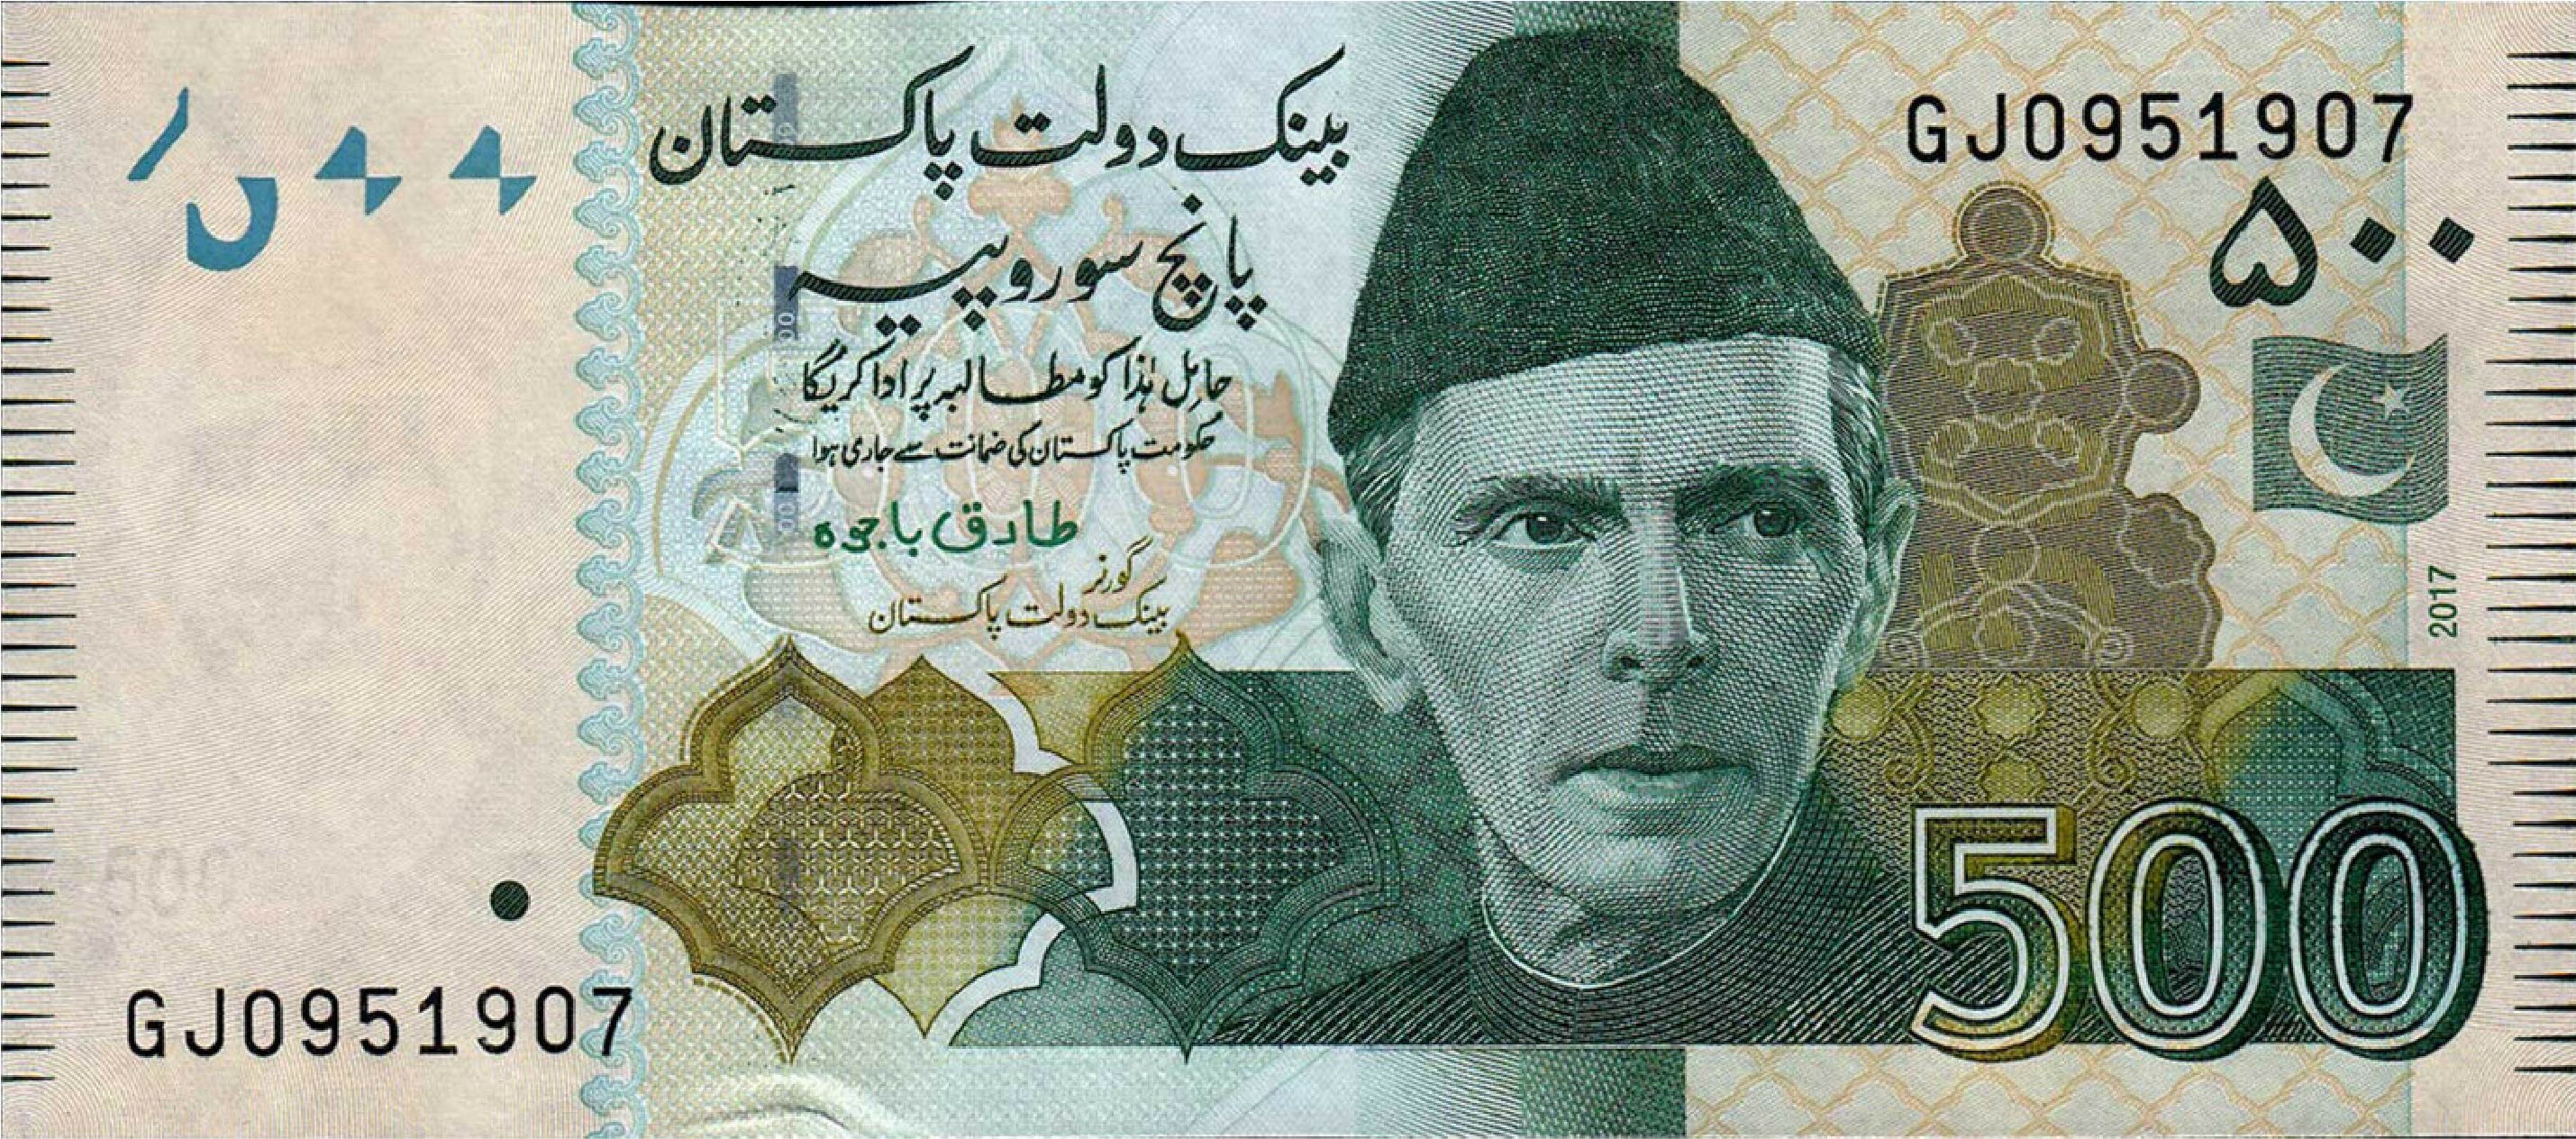 500 Pakistani Rupees banknote  Exchange yours for cash today